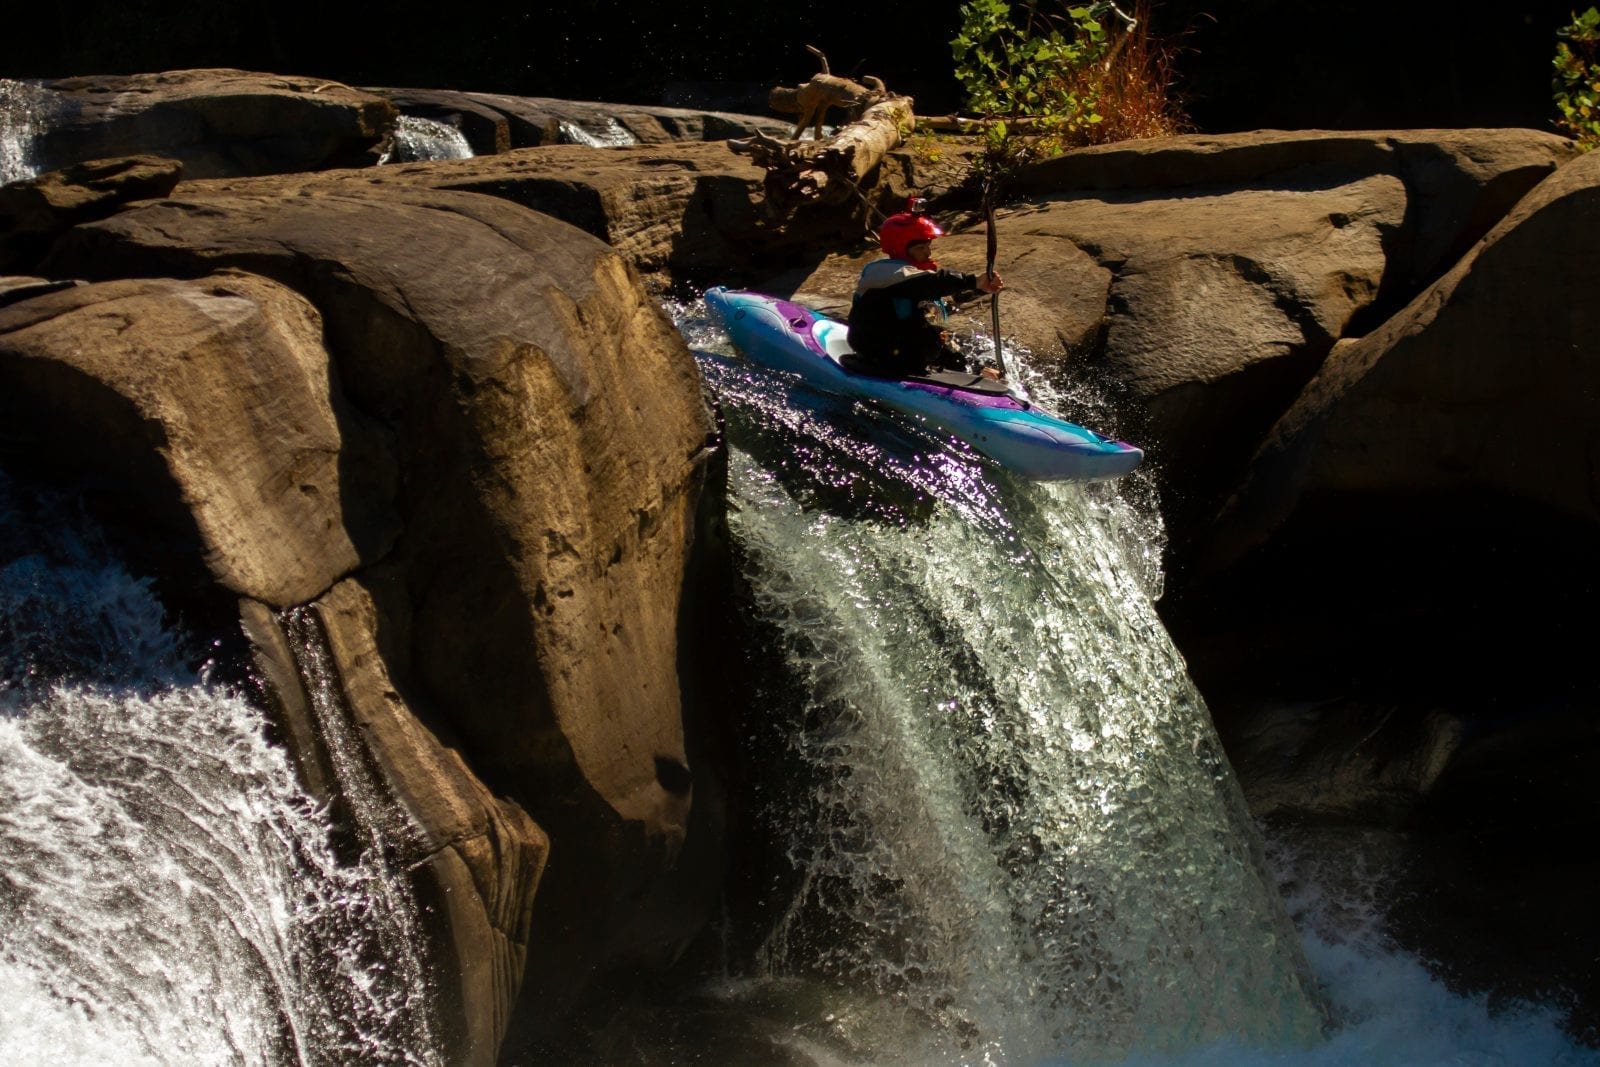 A kayaker wearing a red helmet with camera attached descends down a fast-flowing, rocky waterfall in Ohiopyle Falls, located in the Laurel Highlands in Western Pennsylvania.